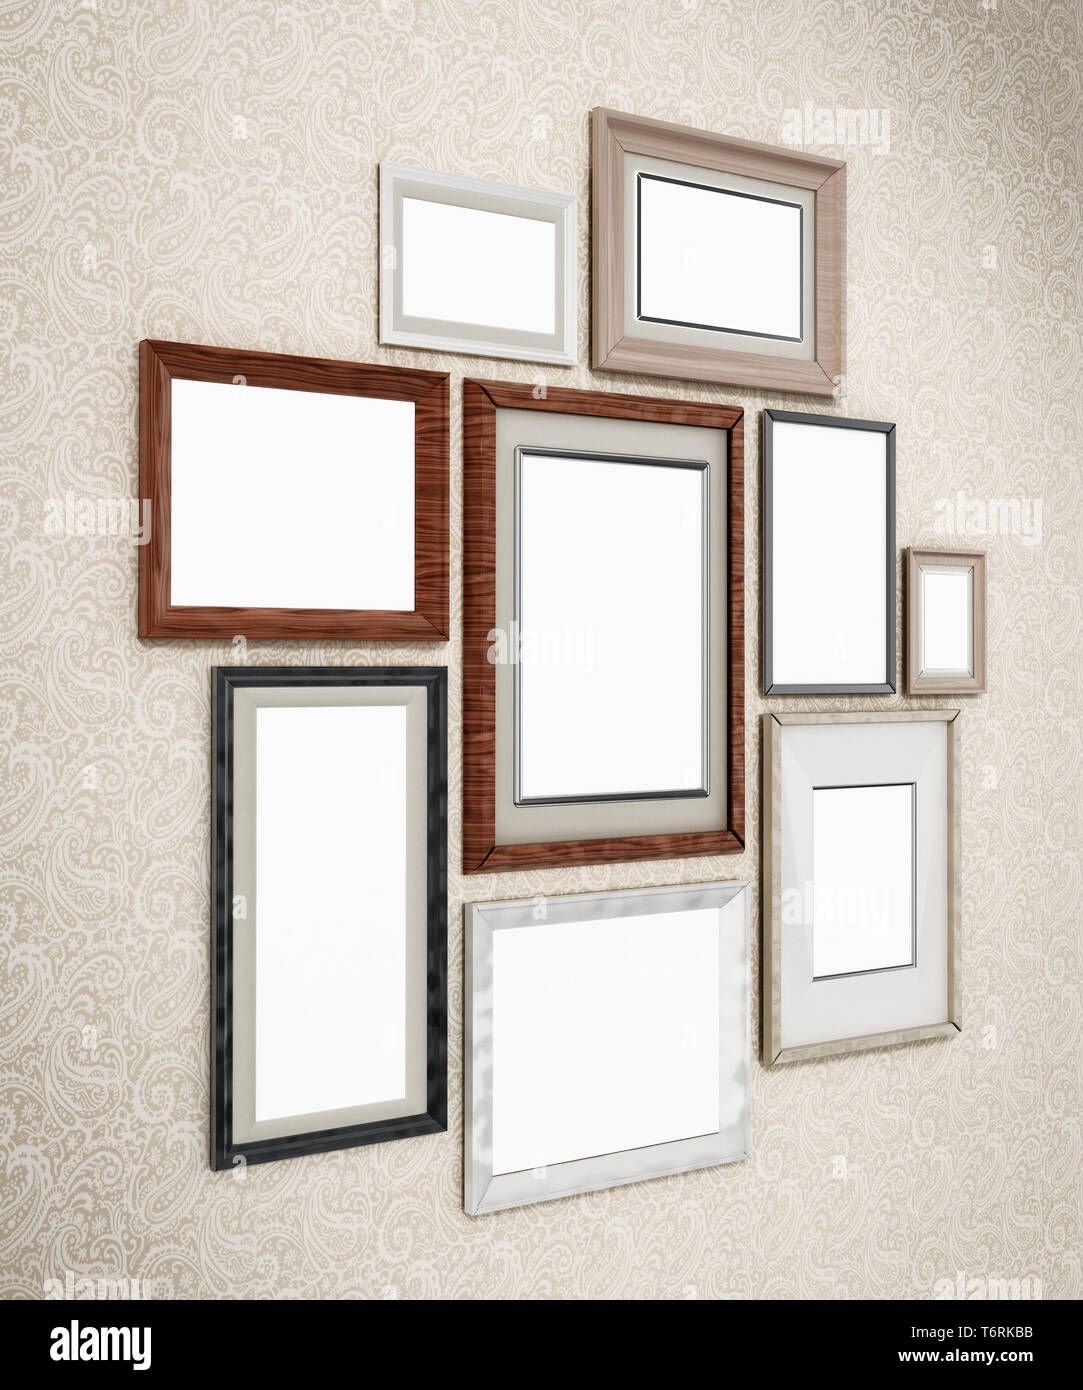 2,972 4 Picture Frames On Wall Images, Stock Photos, 3D objects, & Vectors